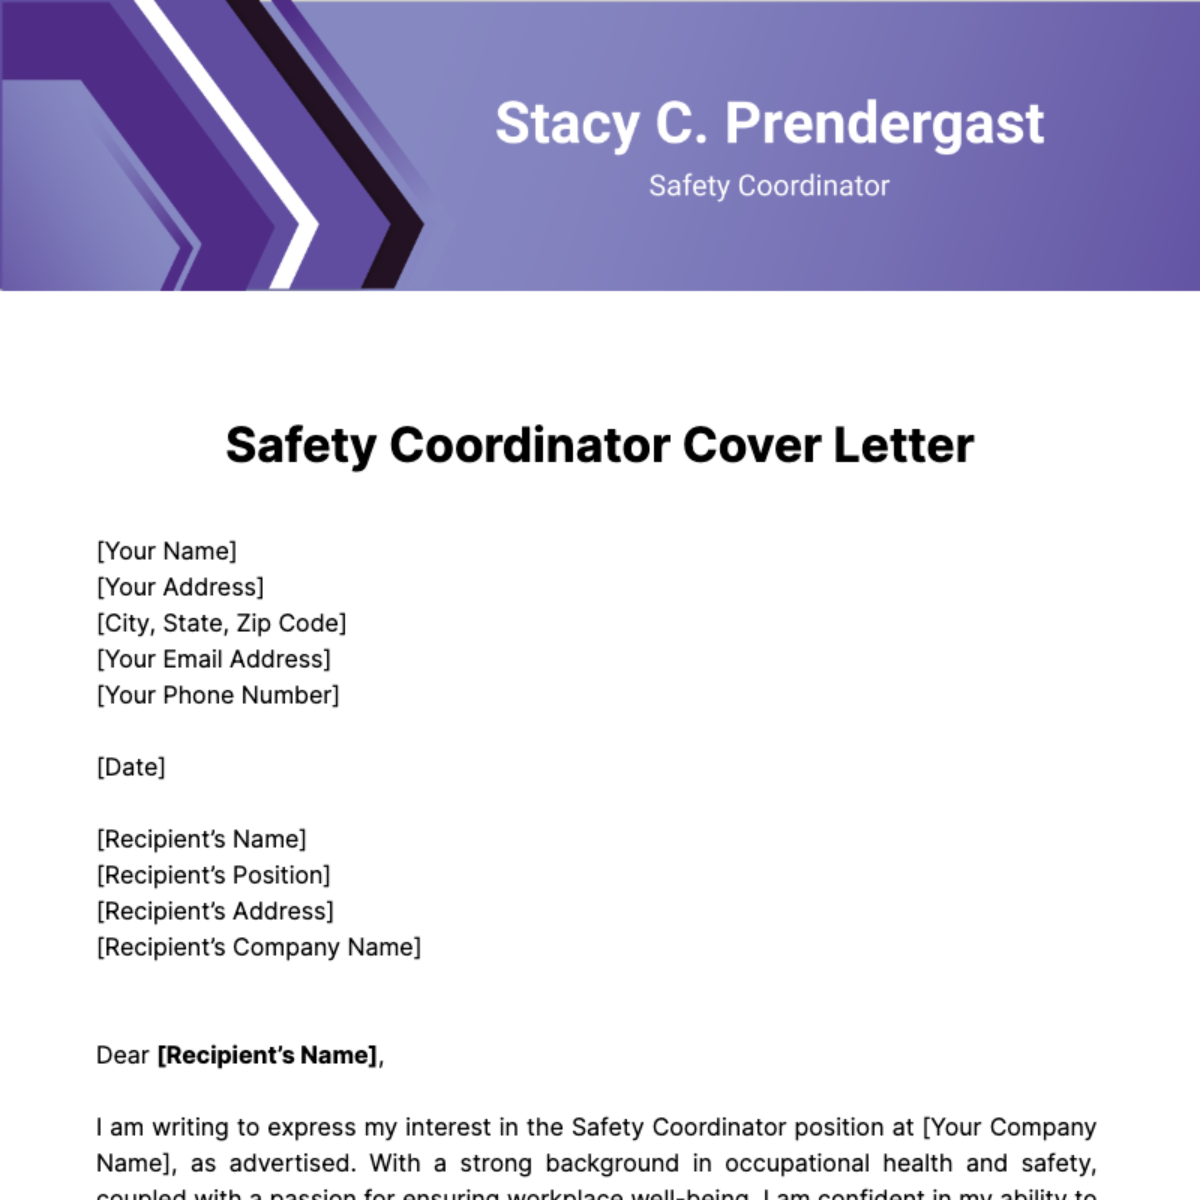 Safety Coordinator Cover Letter Template